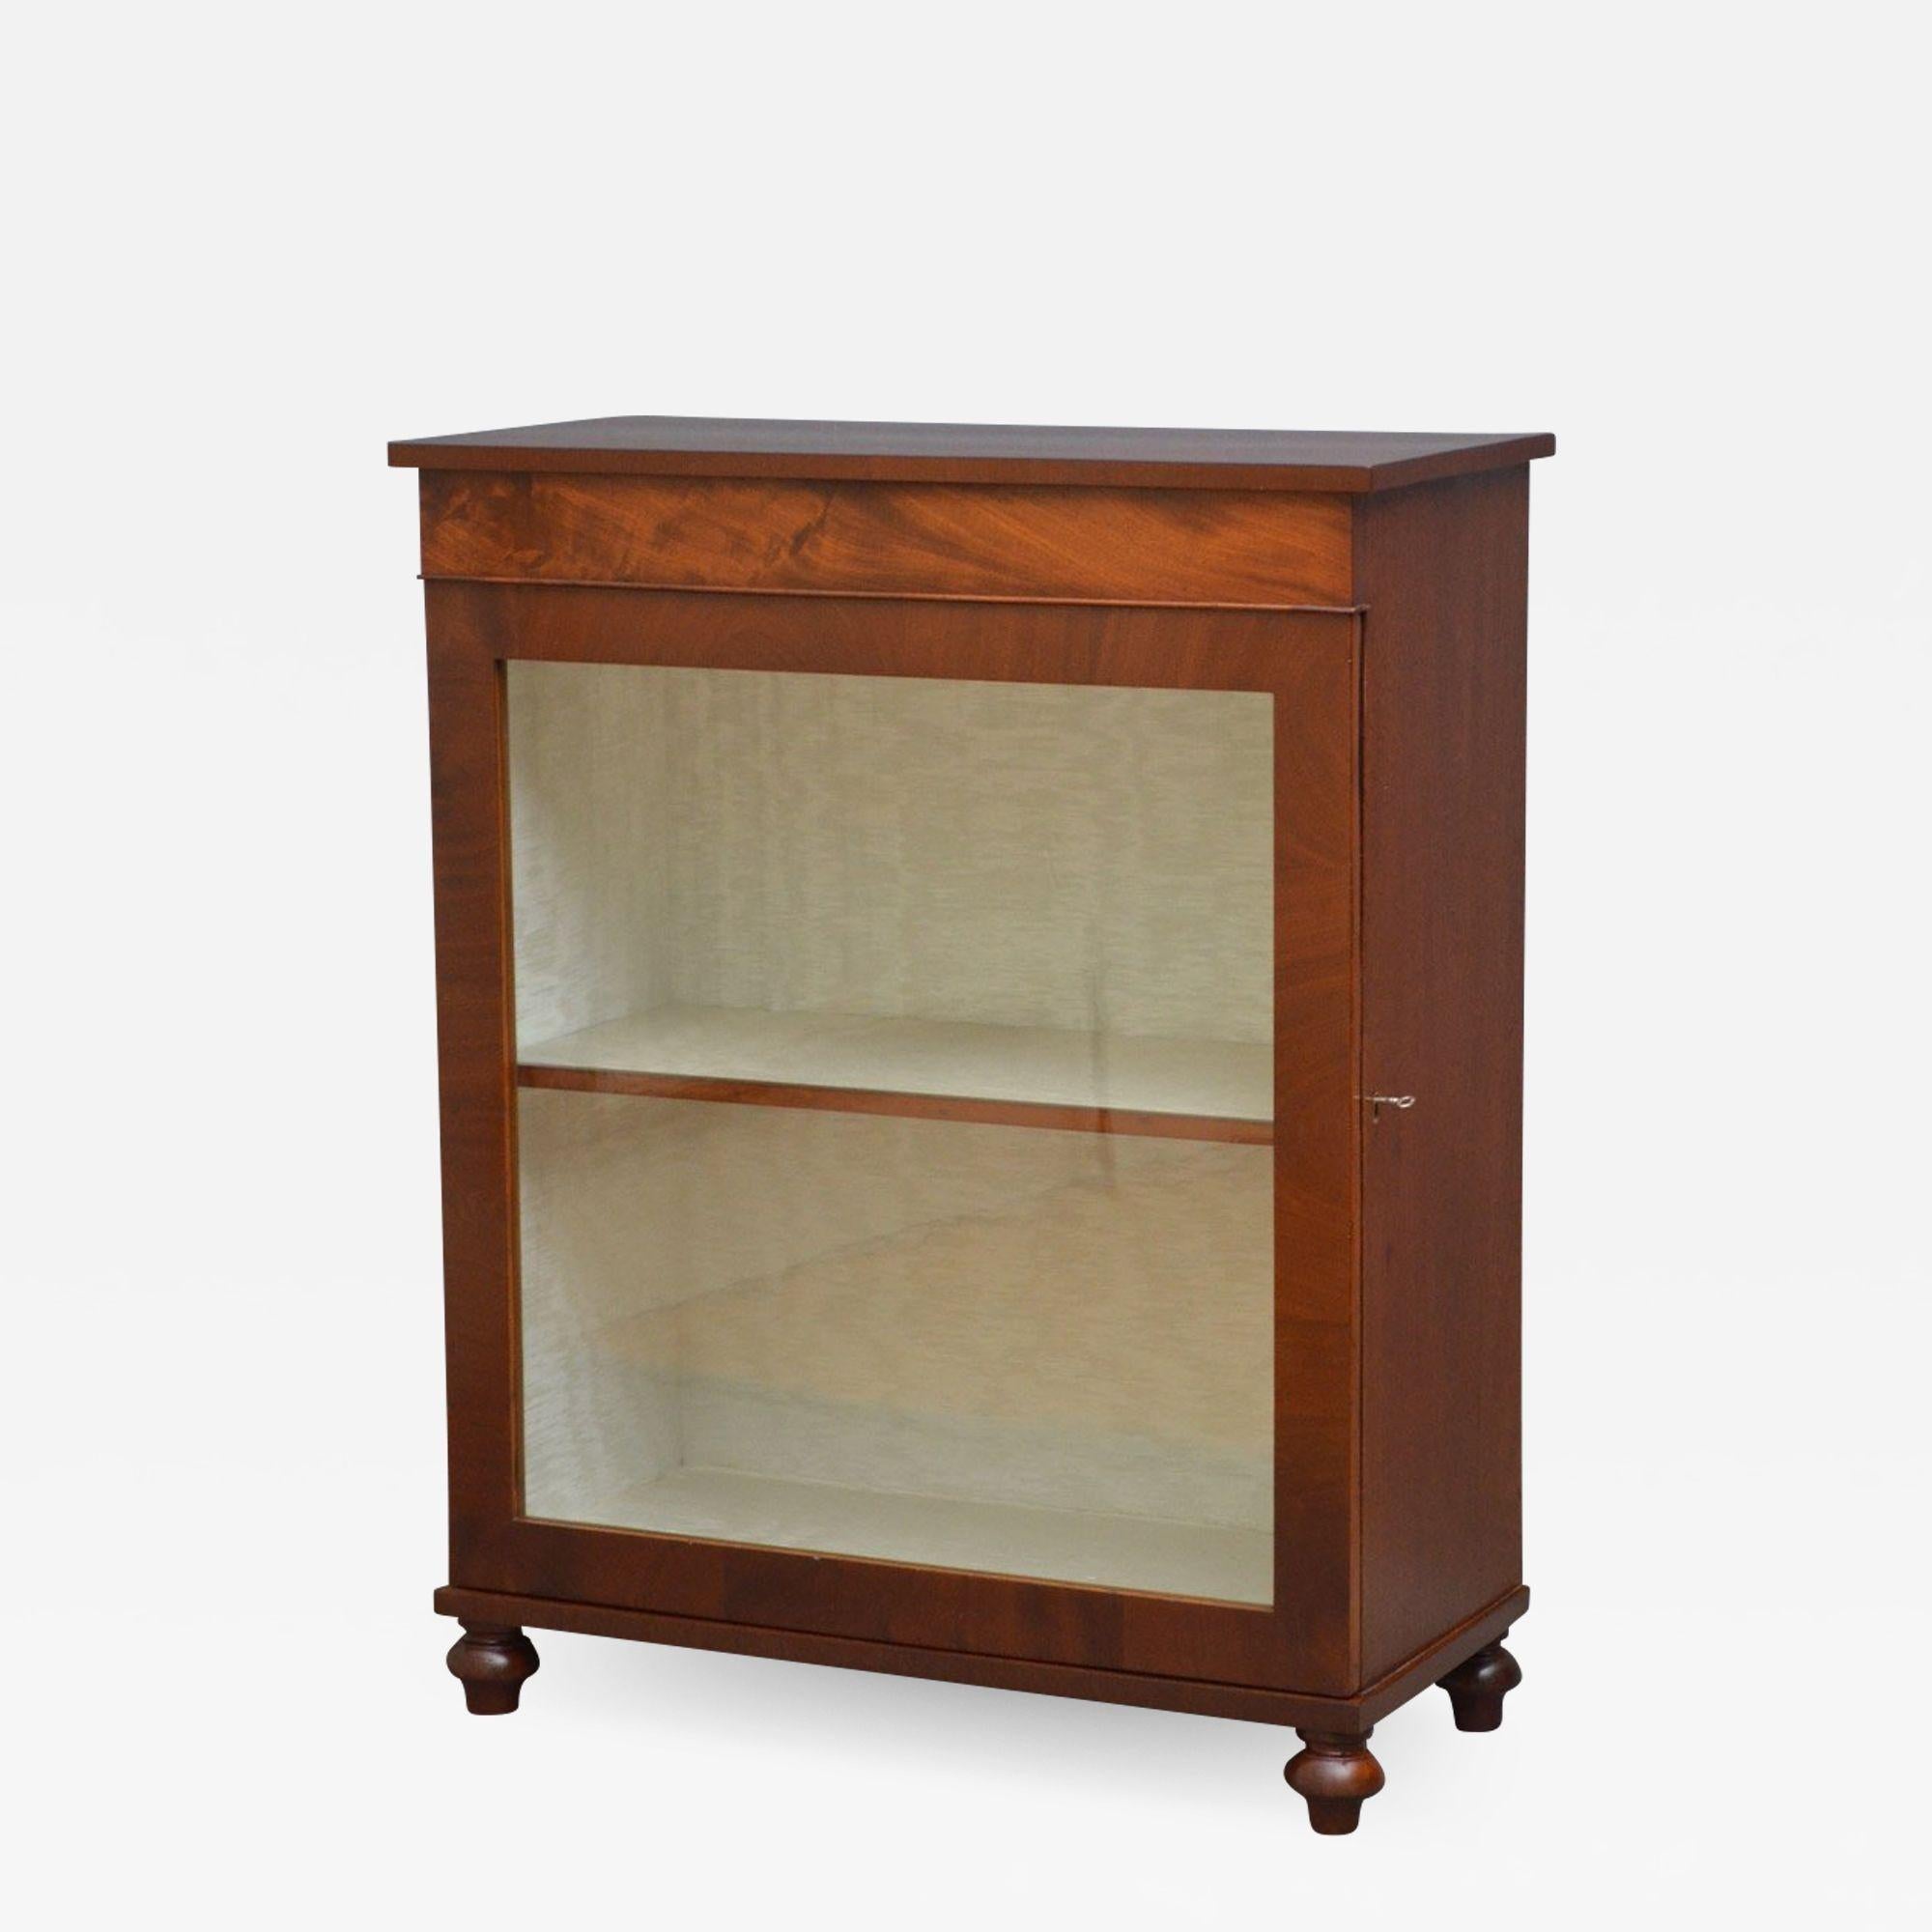 Sn4172, Regency pier cabinet in mahogany, having flamed mahogany top with crossbanded edge above figured frieze and a glazed door enclosing a shelf, all standing on original turned feet. This display cabinet has been sympathetically restored and is